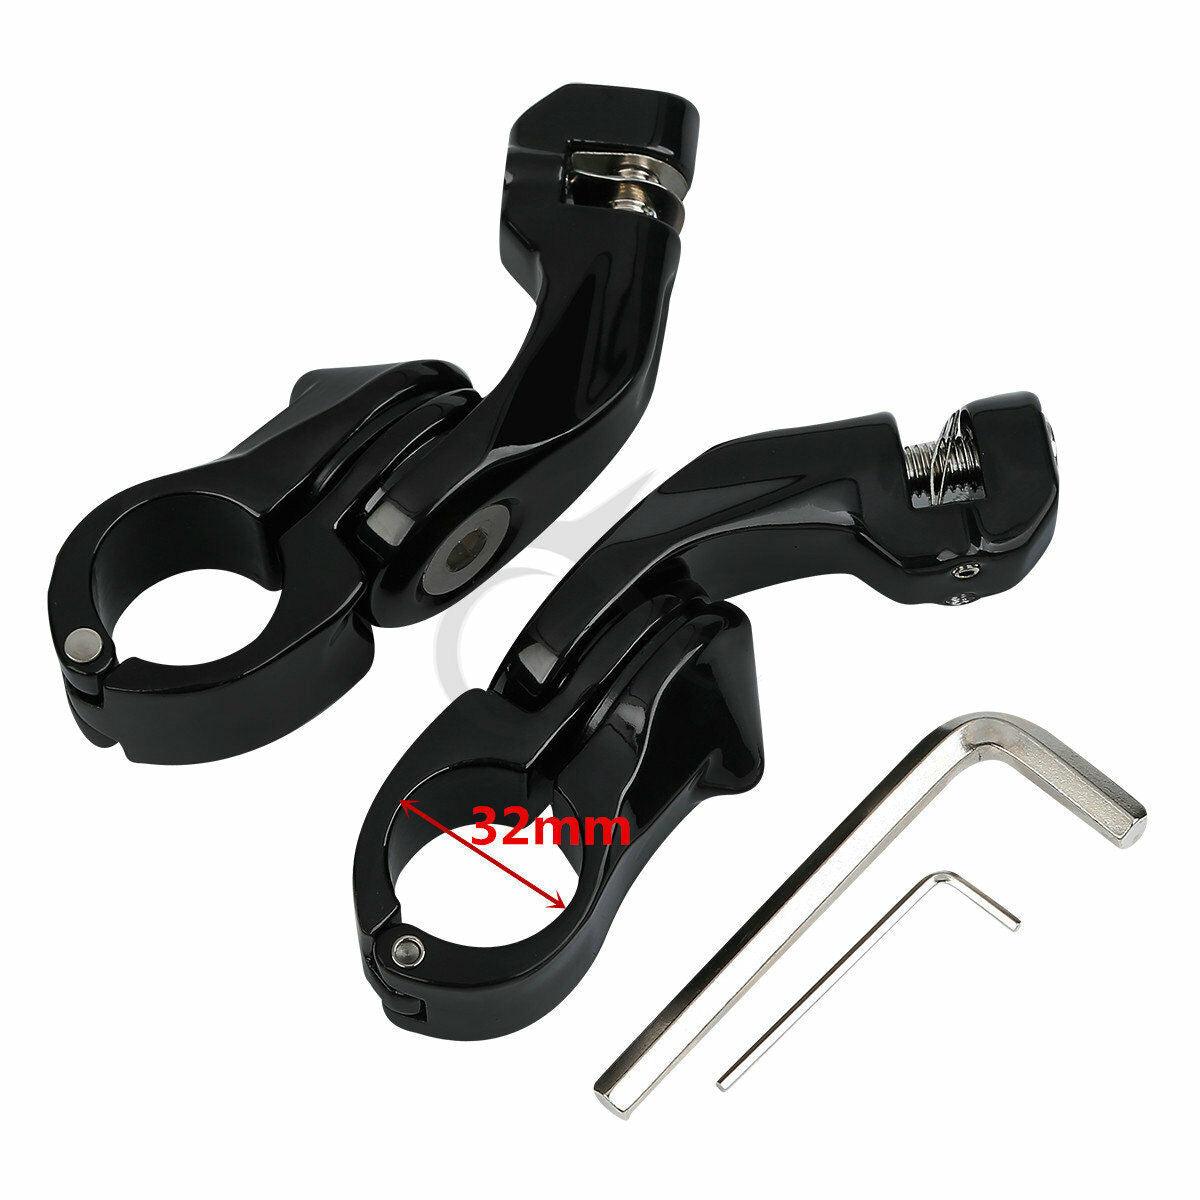 32mm 1.25" Short Angled Highway Engine Guard Foot Pegs Mount For Harley-Davidson - Moto Life Products